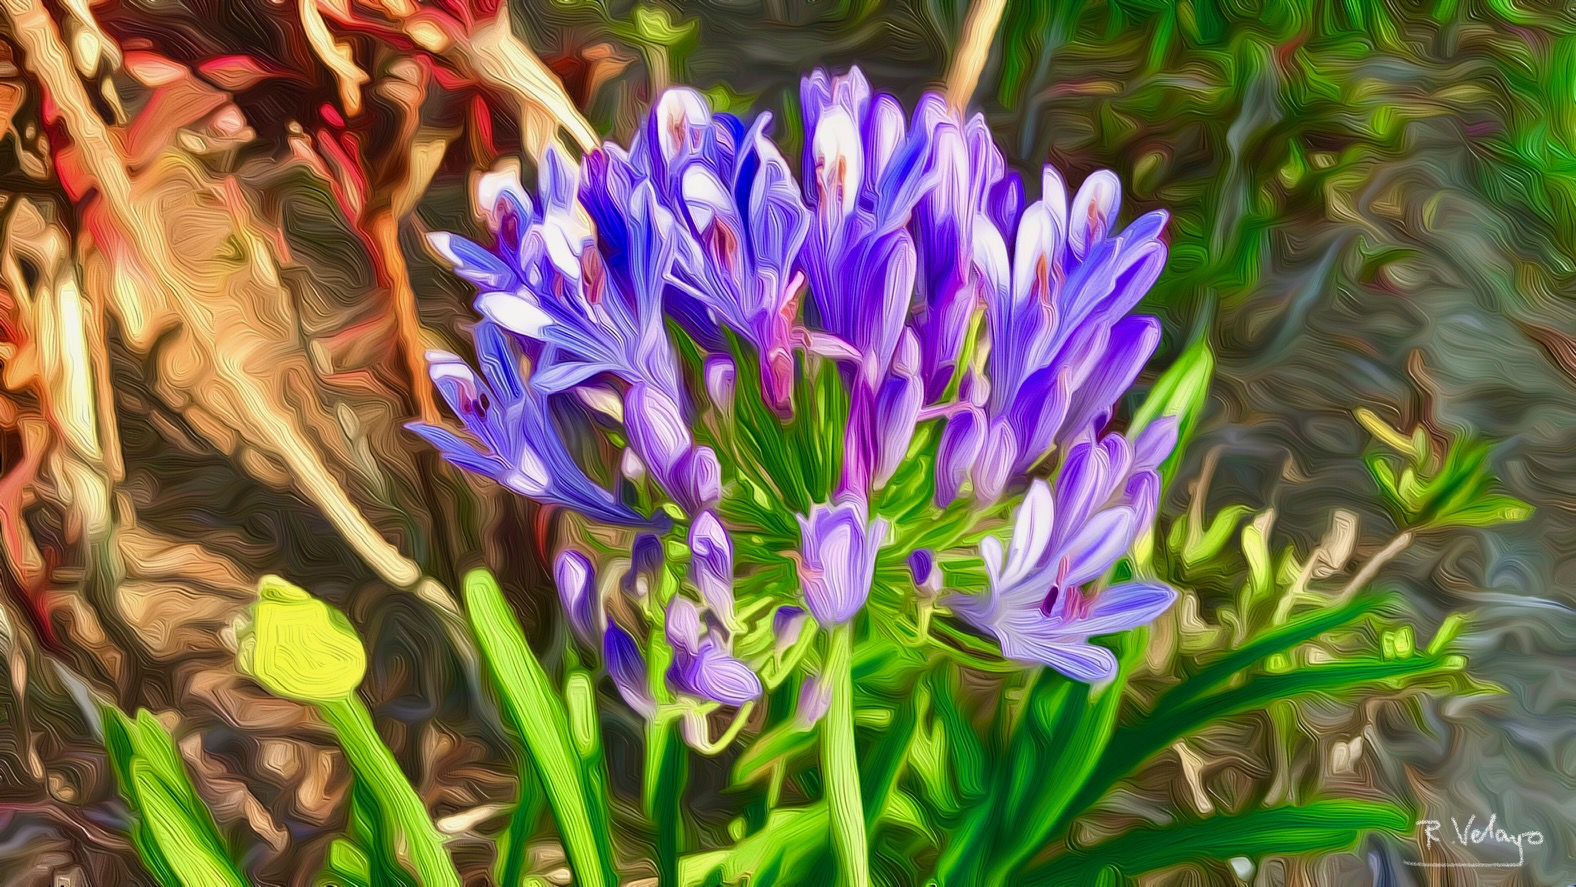 "AFRICAN LILY ON A SUNNY DAY" [Created: 4/23/2021]